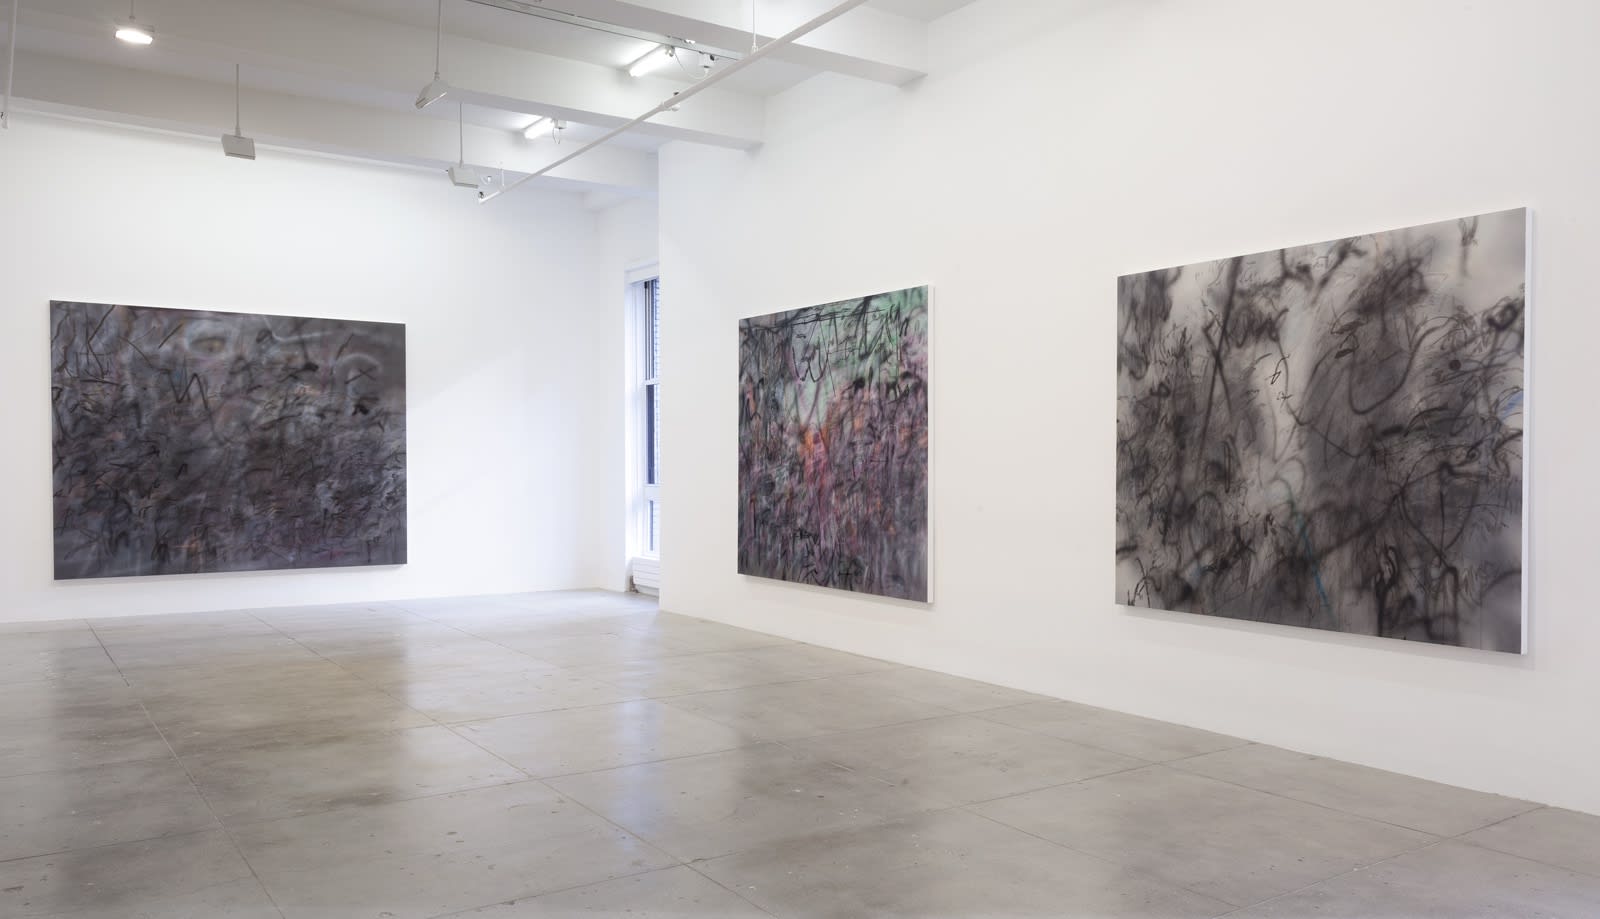 3 abstract paintings hang in a white gallery space with a window.